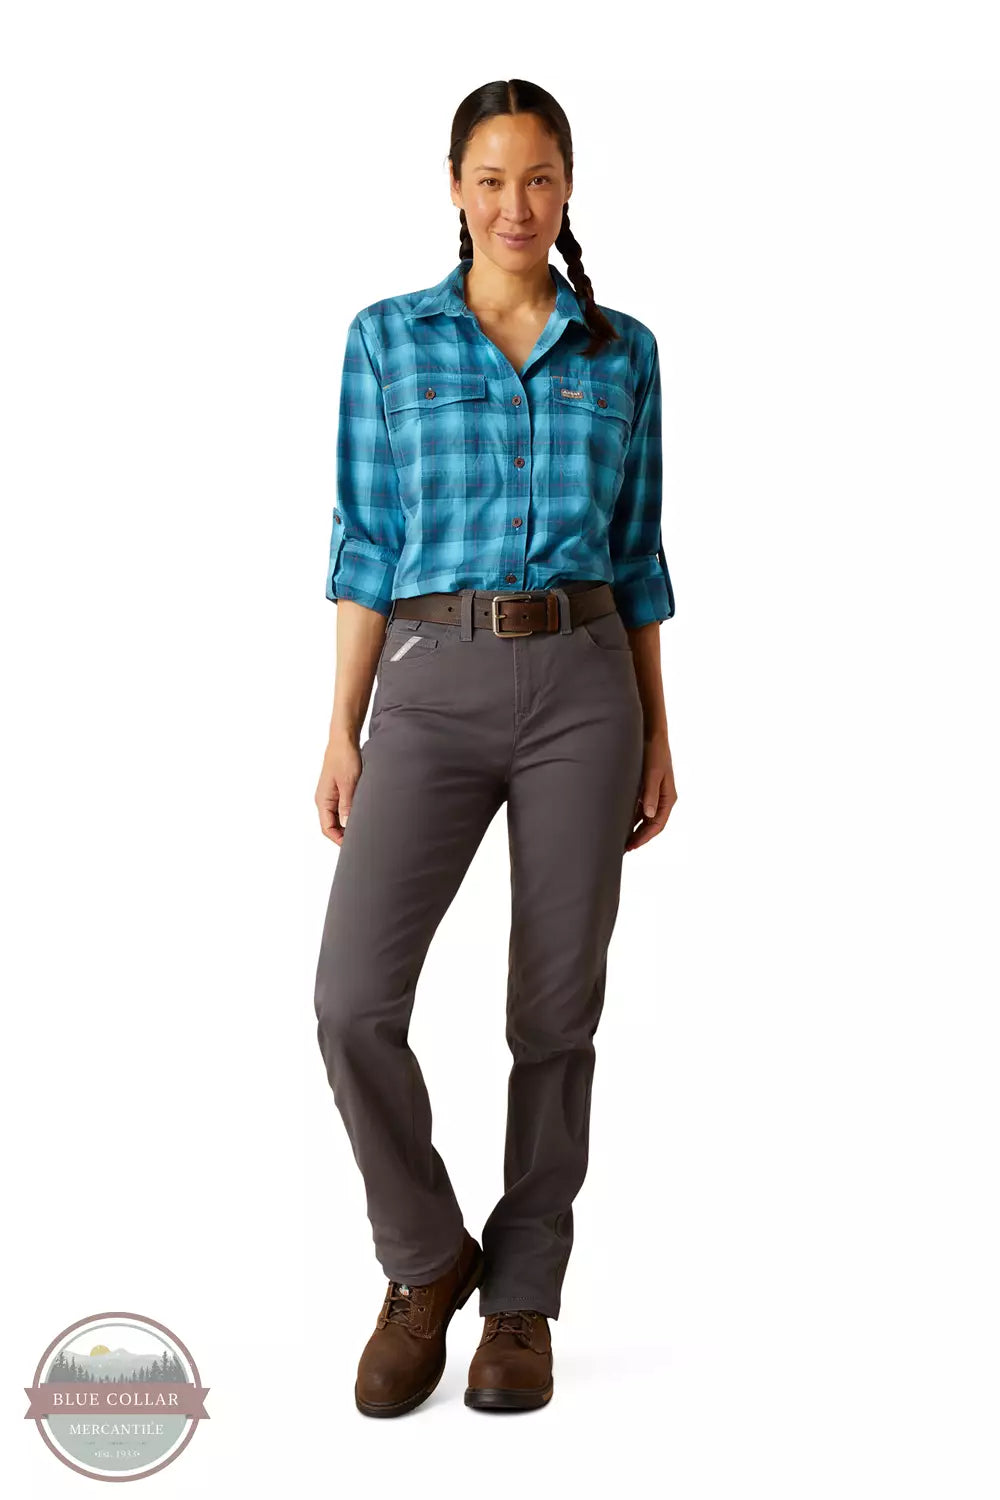 Ariat 10048715 Rebar Made Tough DuraStretch Work Shirt in Prominent Blue Plaid Full View